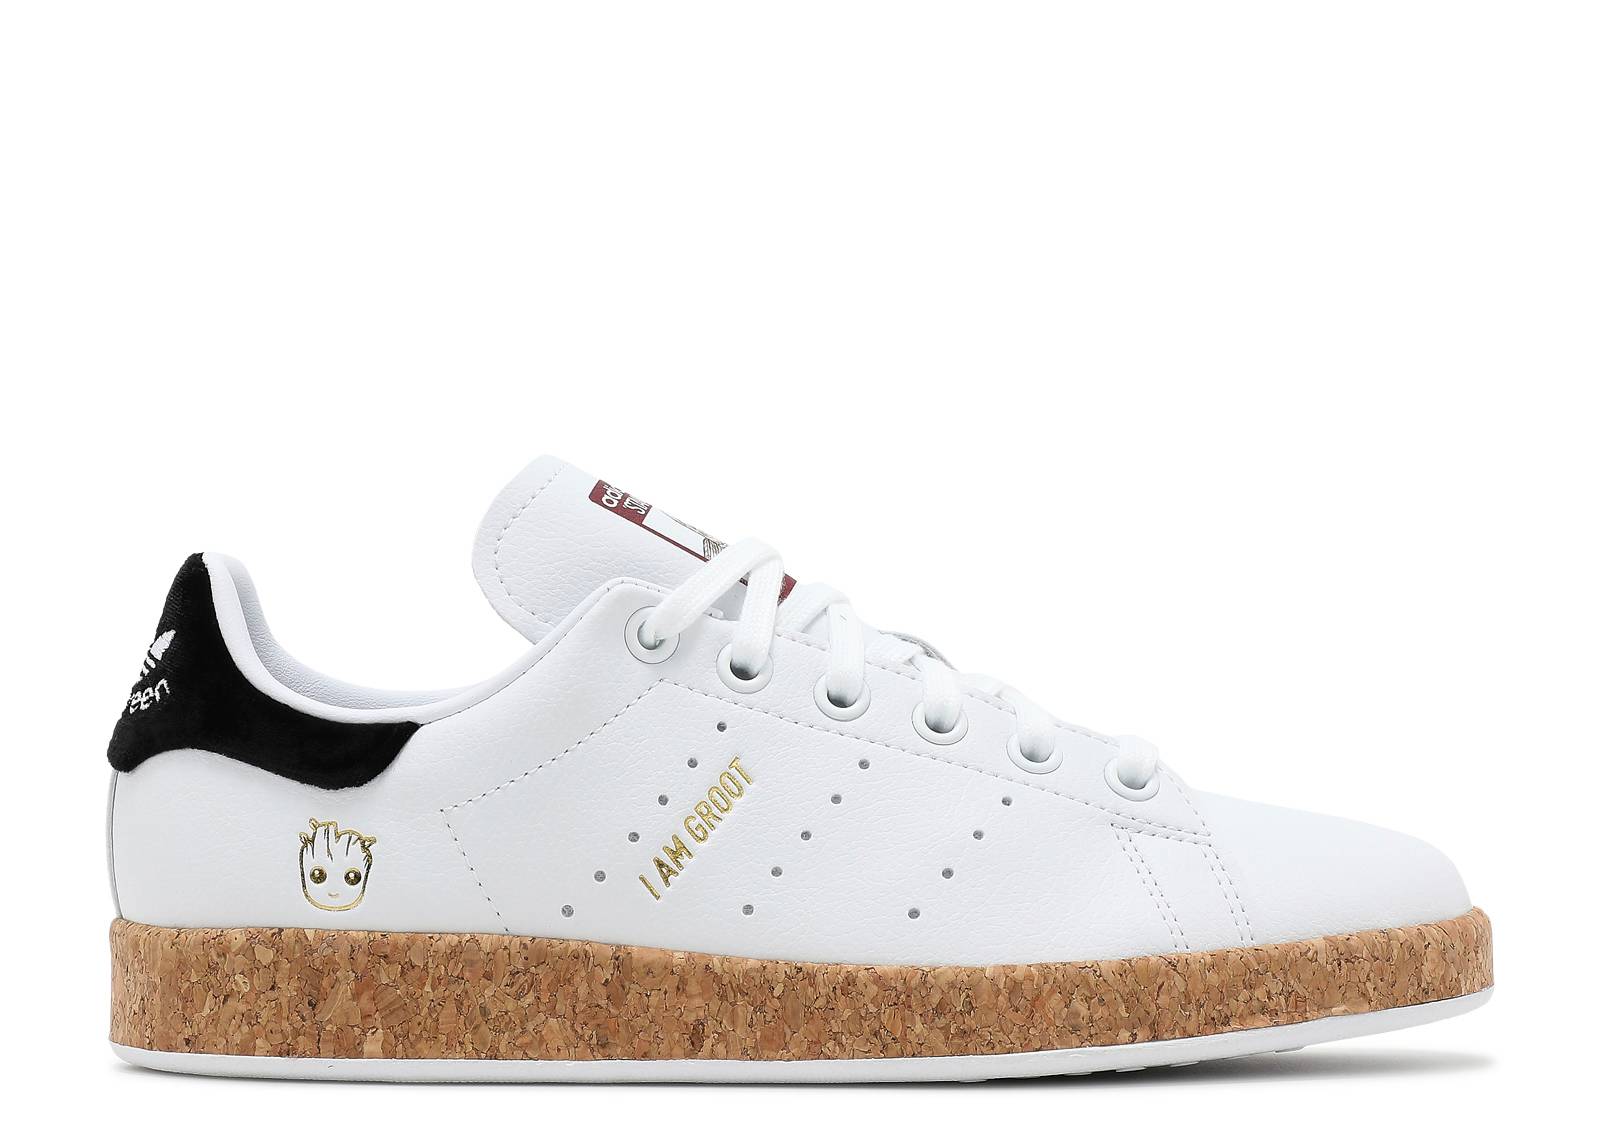 Marvel x Wmns Stan Smith 'I Am Groot'